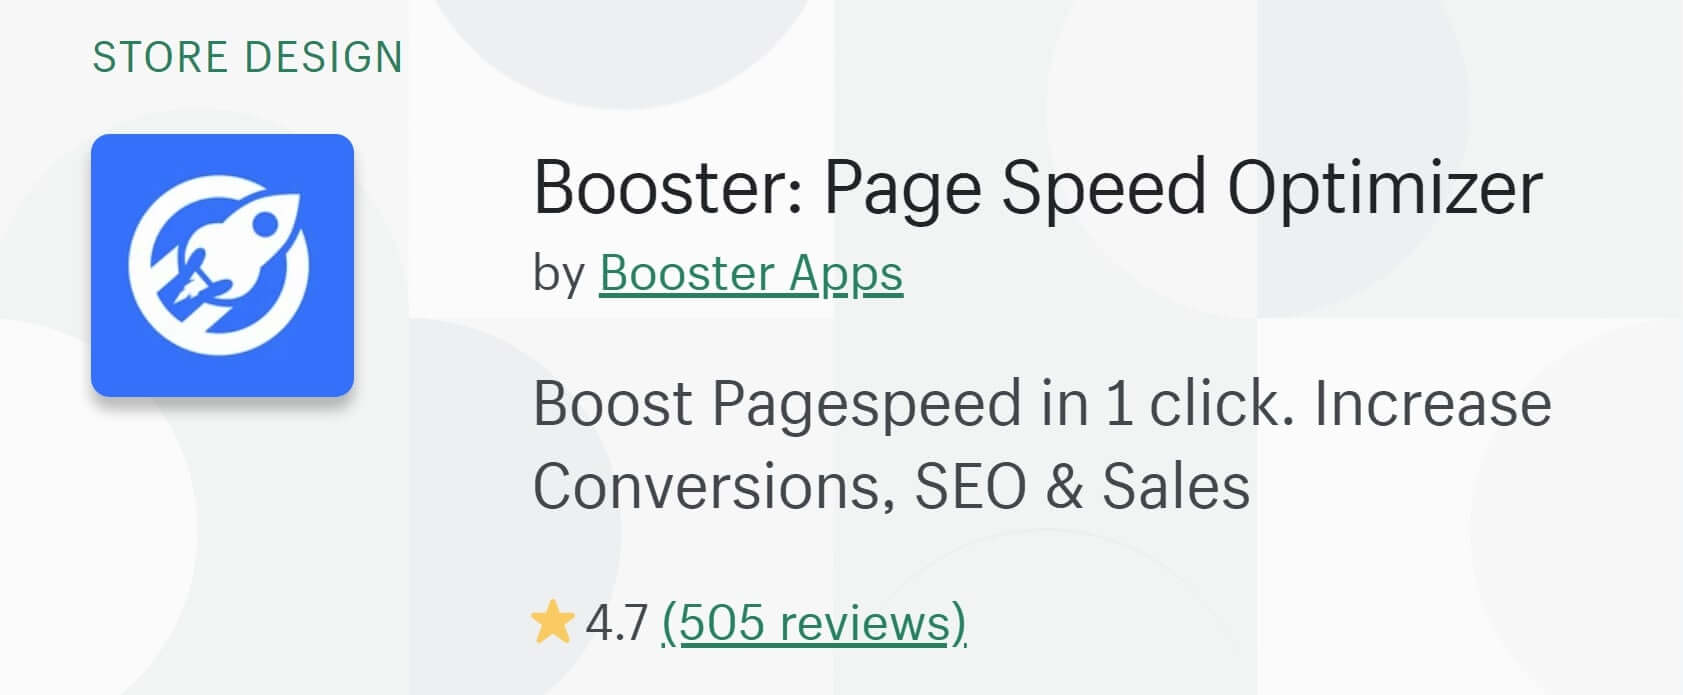 Booster Apps Shopify Page Speed